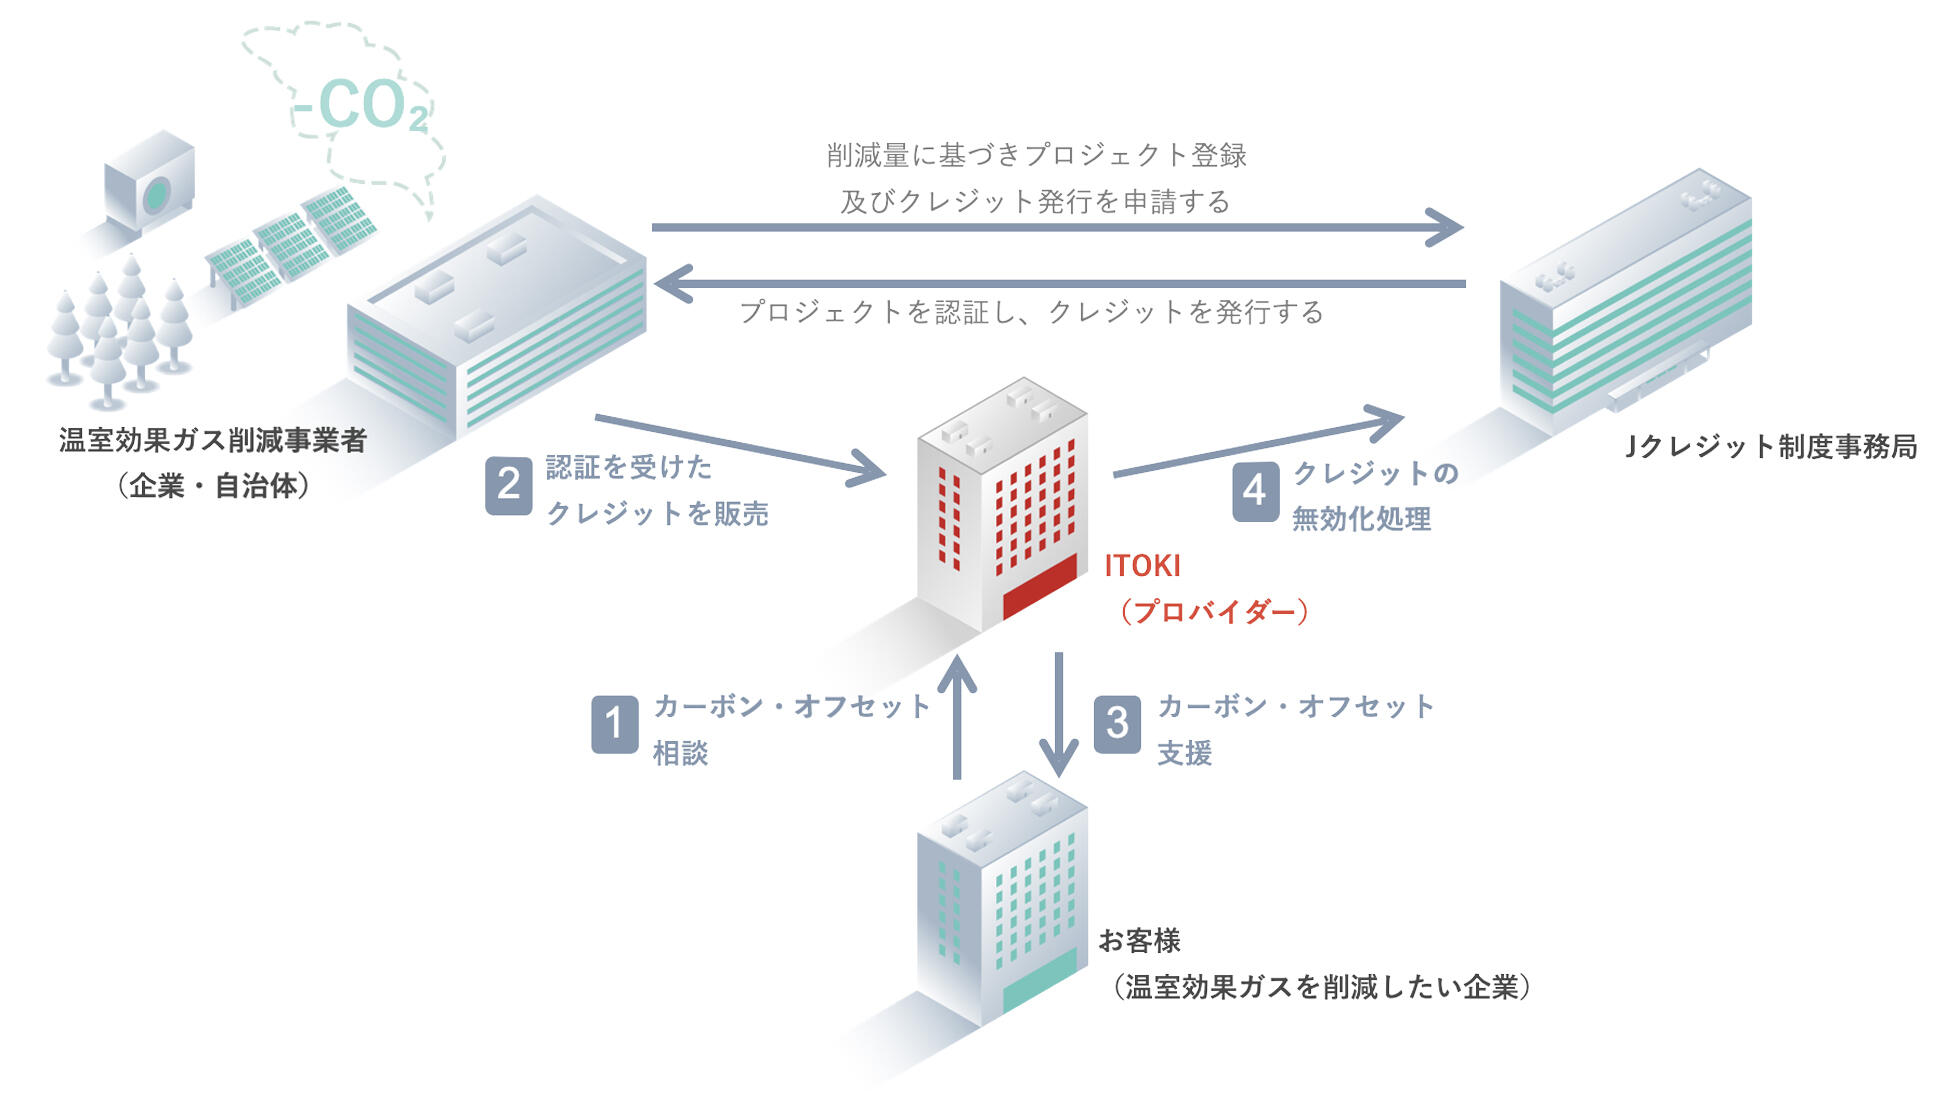 Figure: Image of ITOKI supporting customers as a J-Credit provider